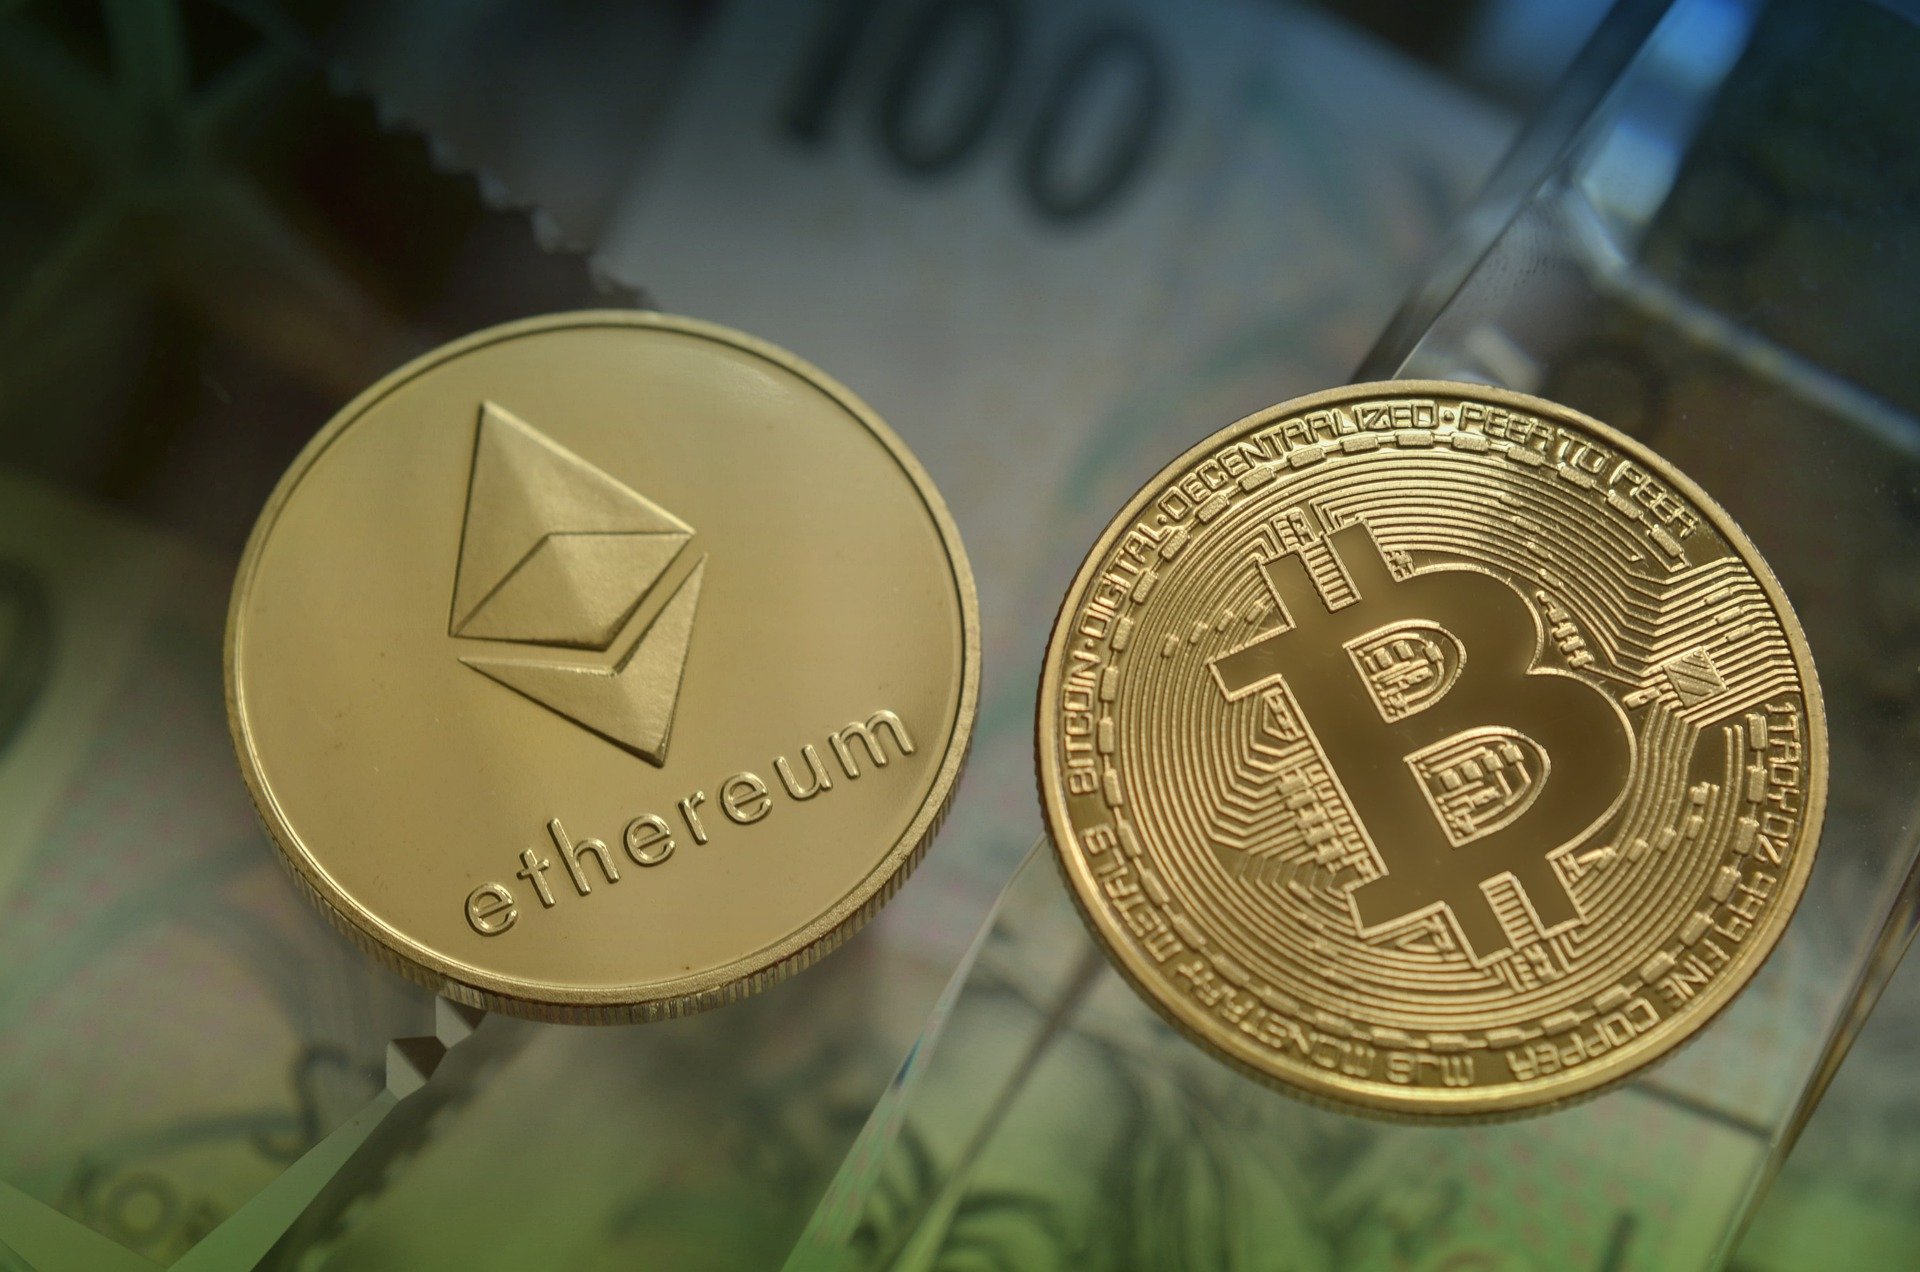 Bitcoin’s price has risen to $51,500, while Ethereum’s price has increased by 24 percent in only seven days